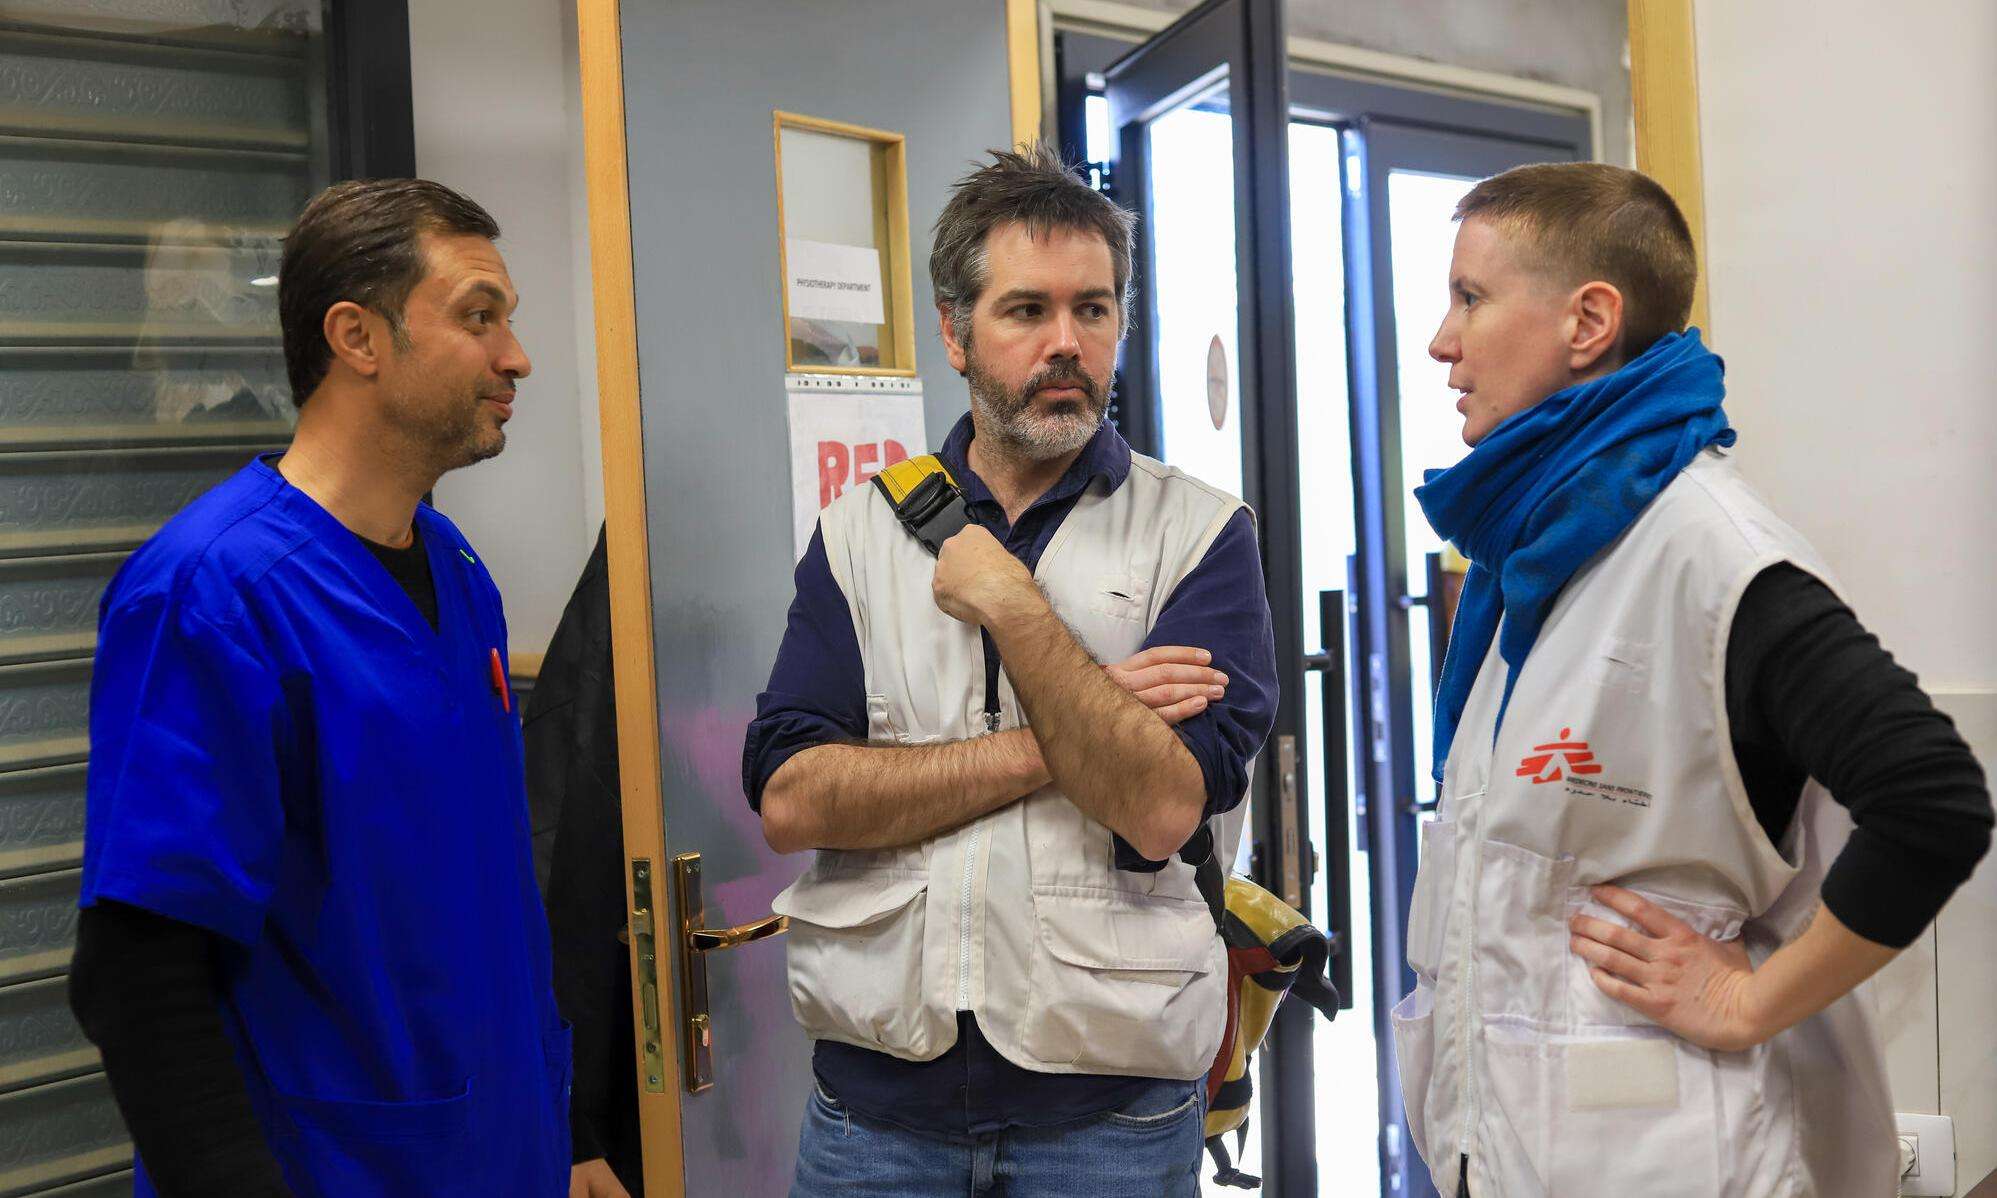 Christopher Lockyear speaks with other MSF staff on a visit to Gaza, Palestine.